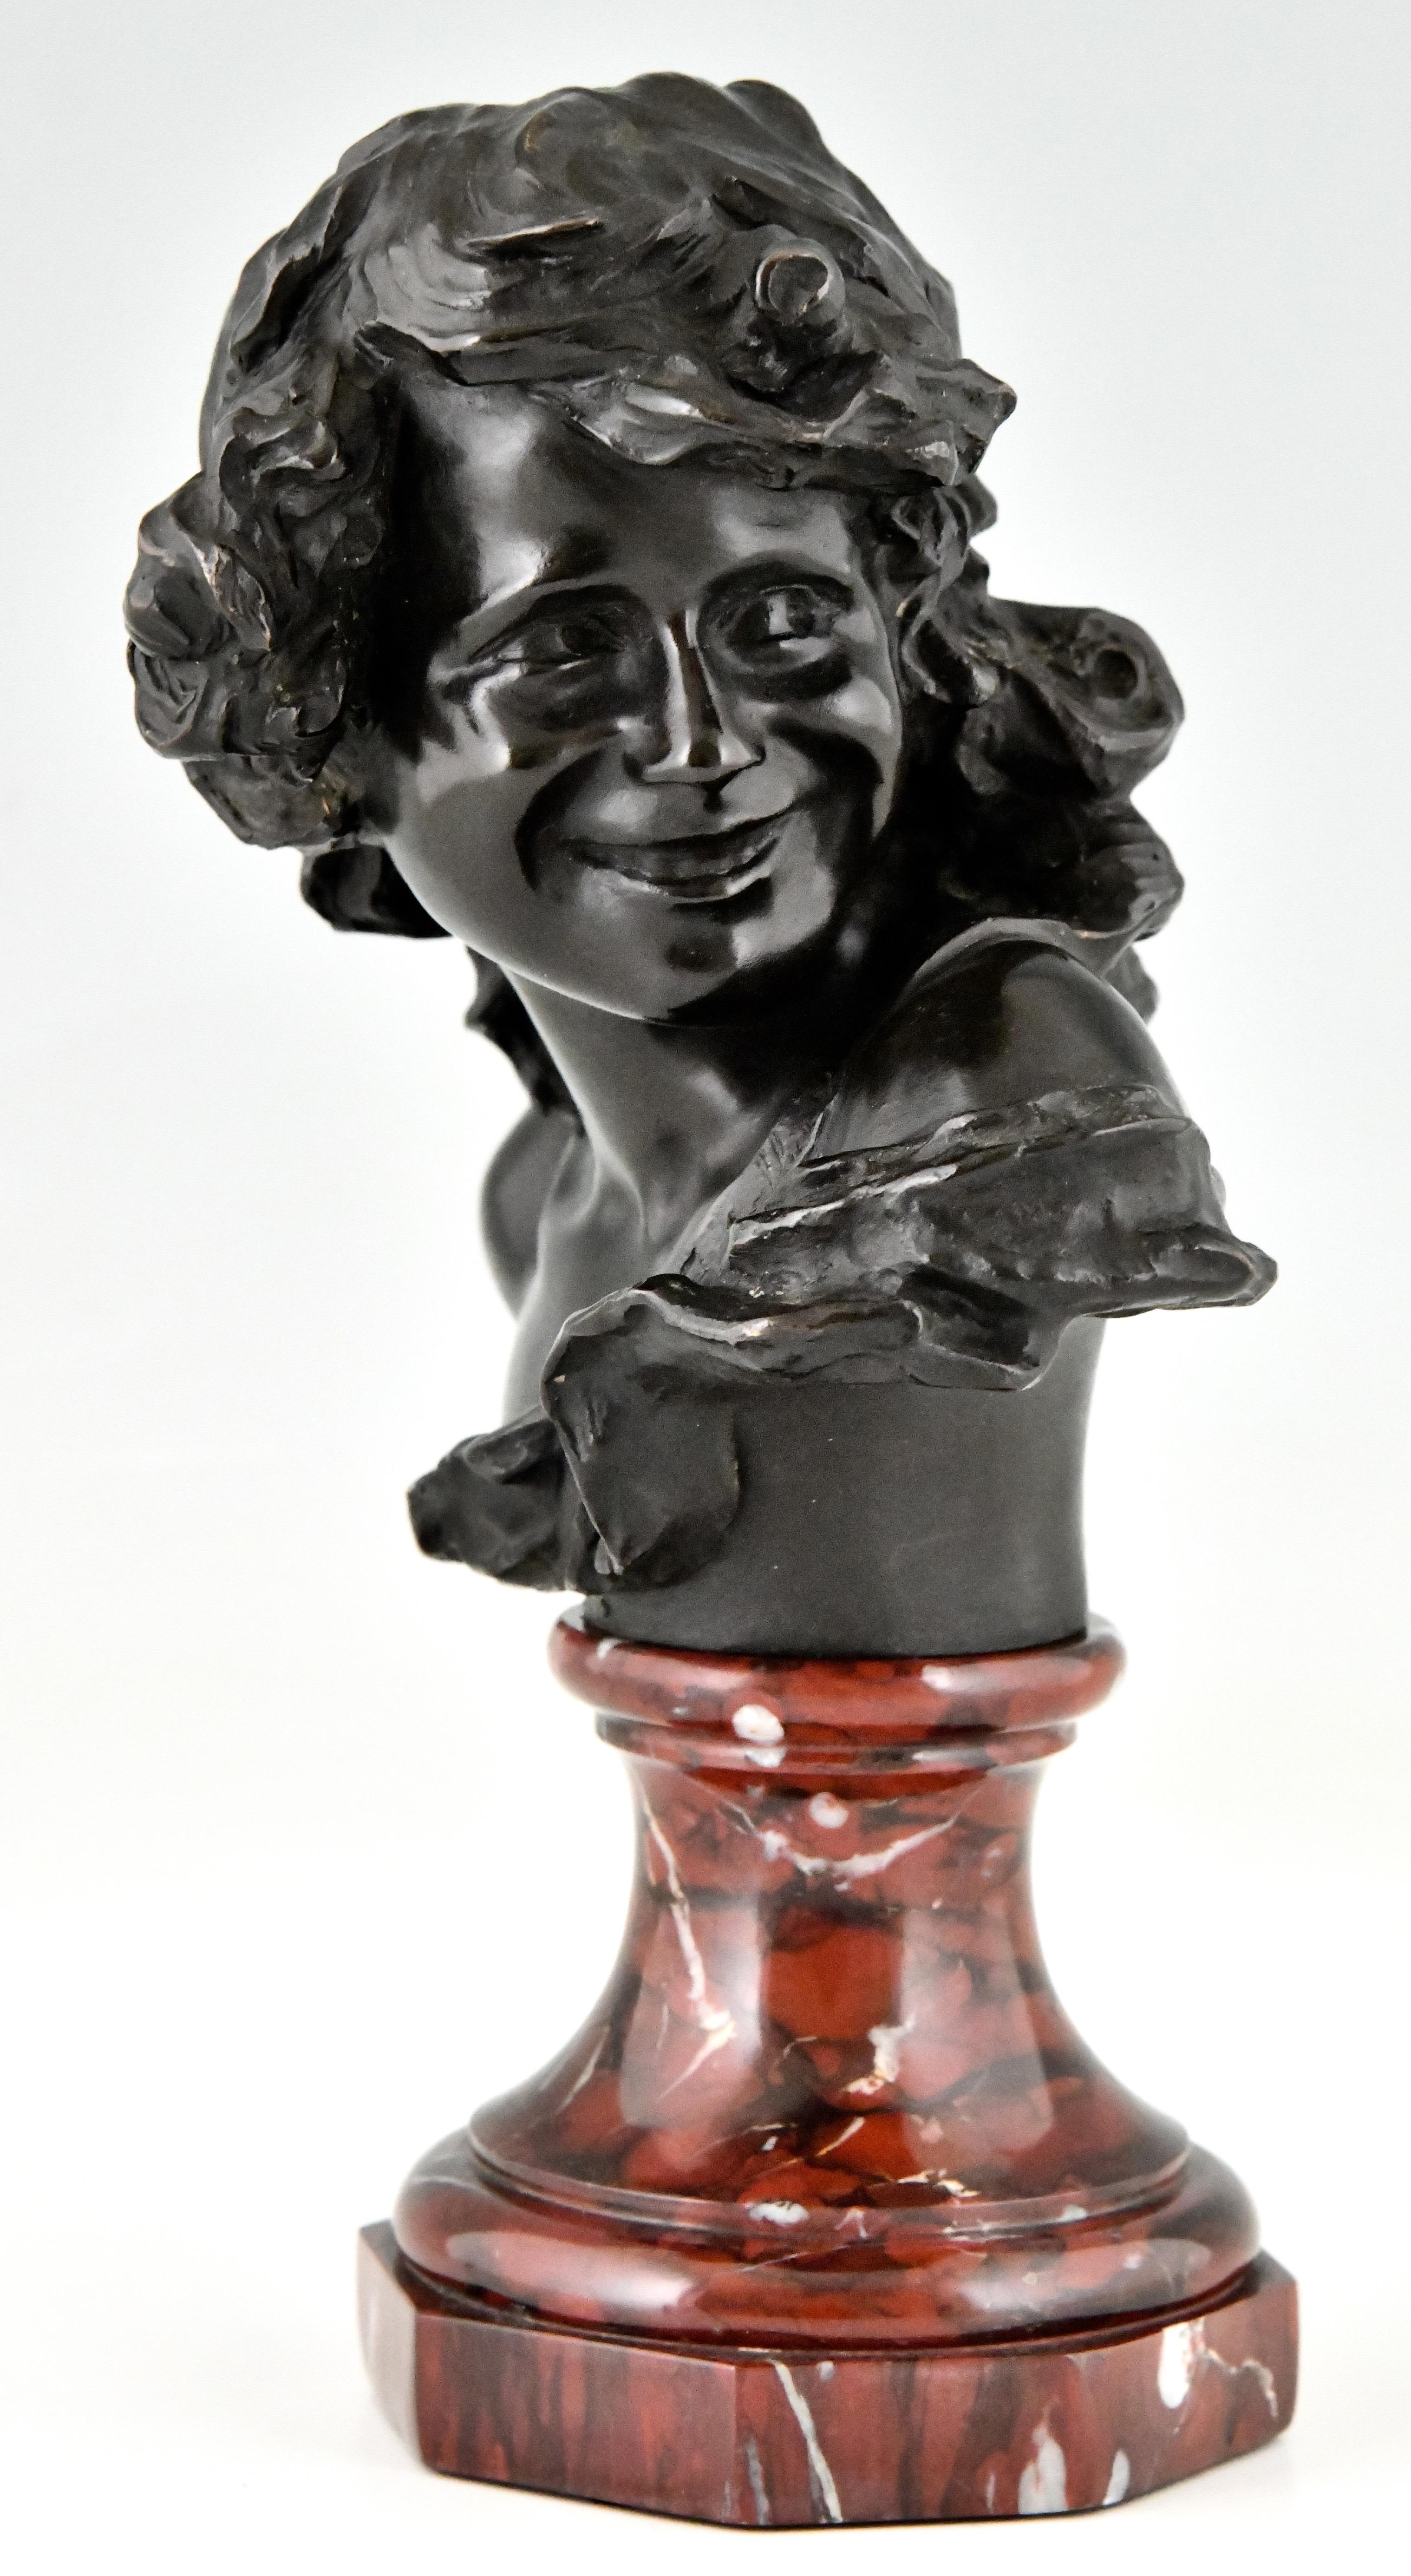 Antique bronze bust of a smiling child by Jean Antoine Injalbert. Foundry mark Siot Decauville Paris, Numbered. France 1900. 
Bronze, patinated. Belgian red marble base. 
Jean Antoine Injalbert, Beziers 1845-Paris 1933. 
There is a picture of